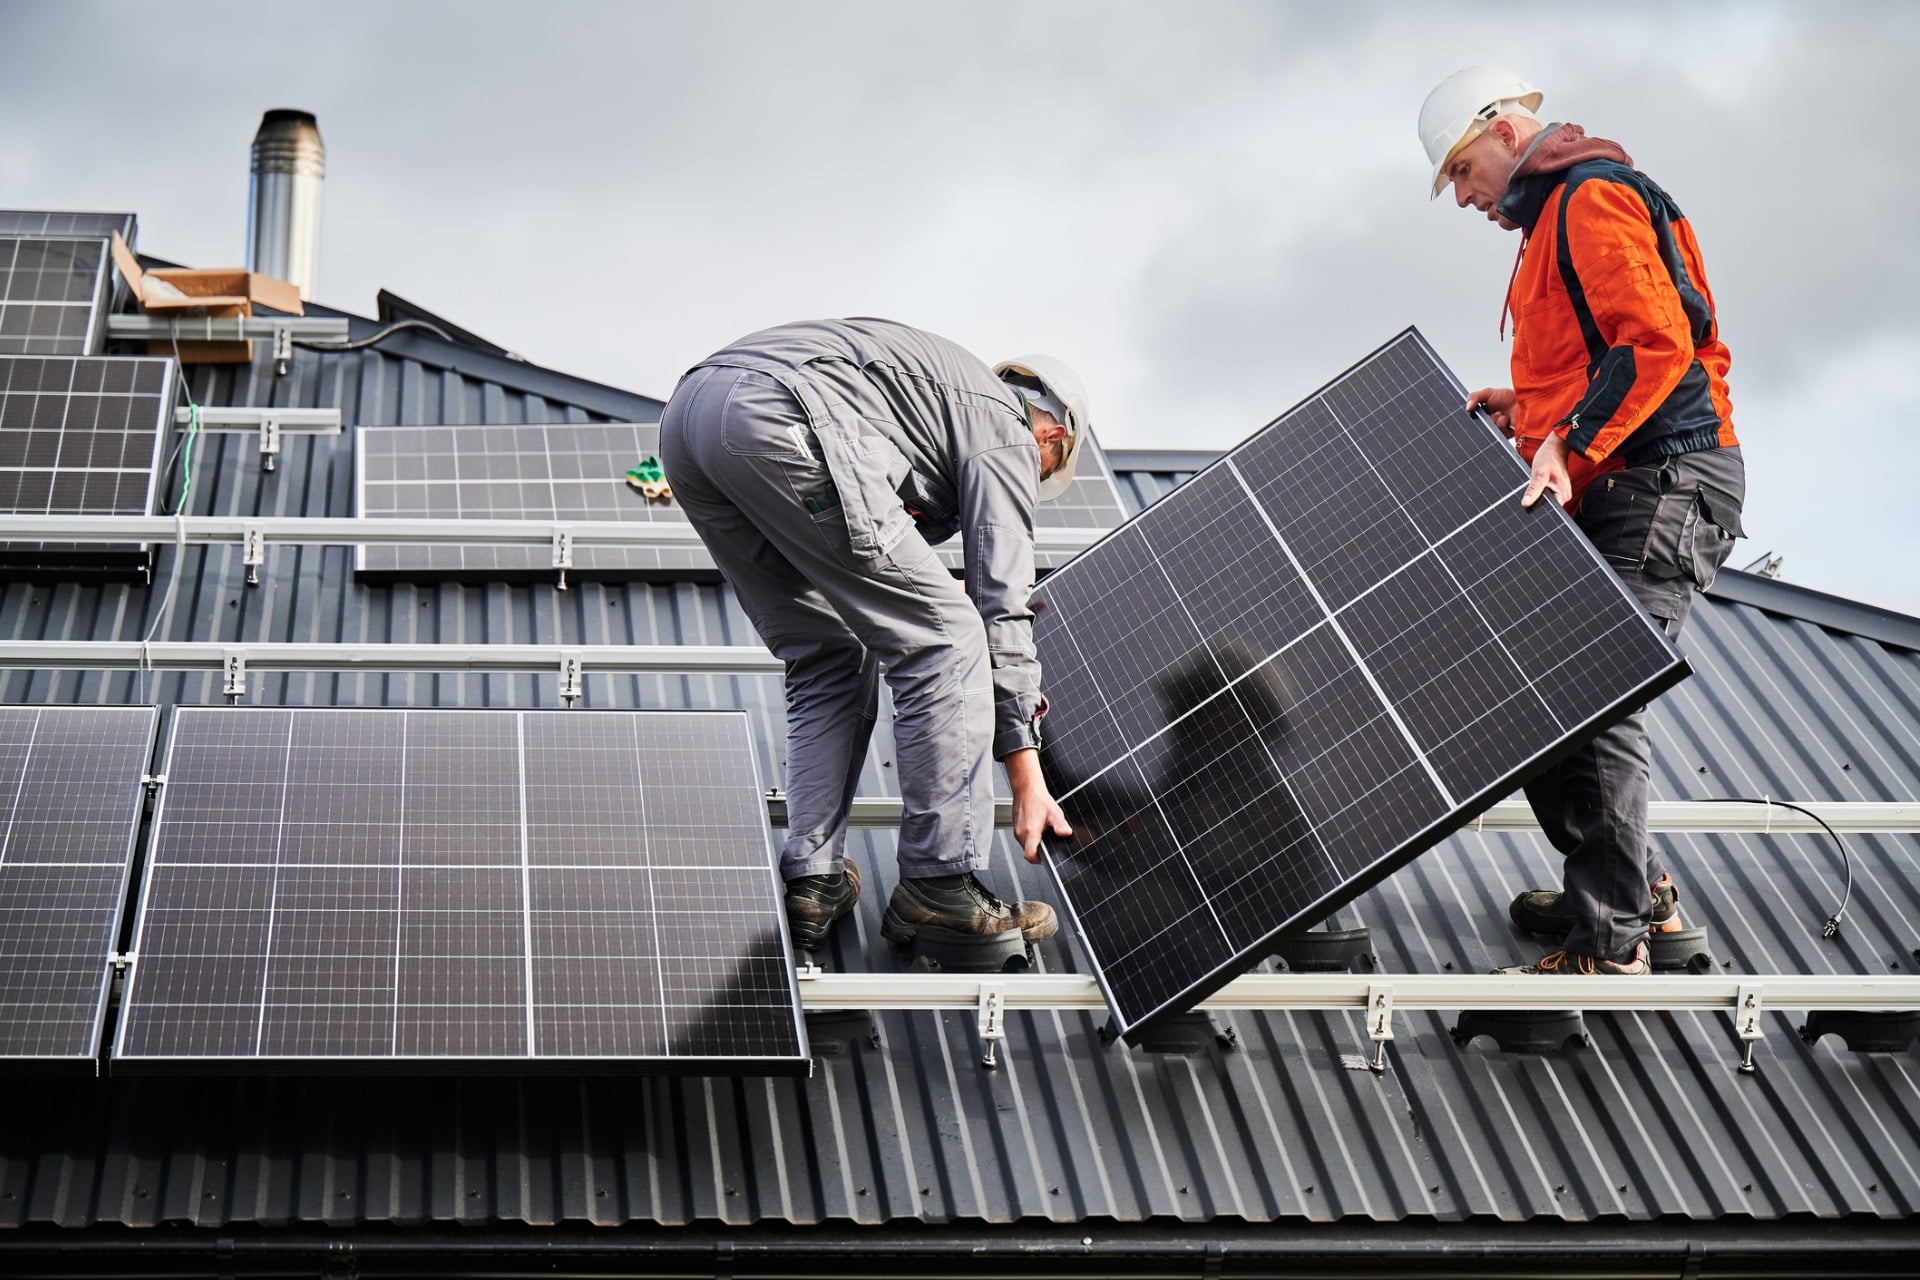 Two technicians installing solar panels on a roof